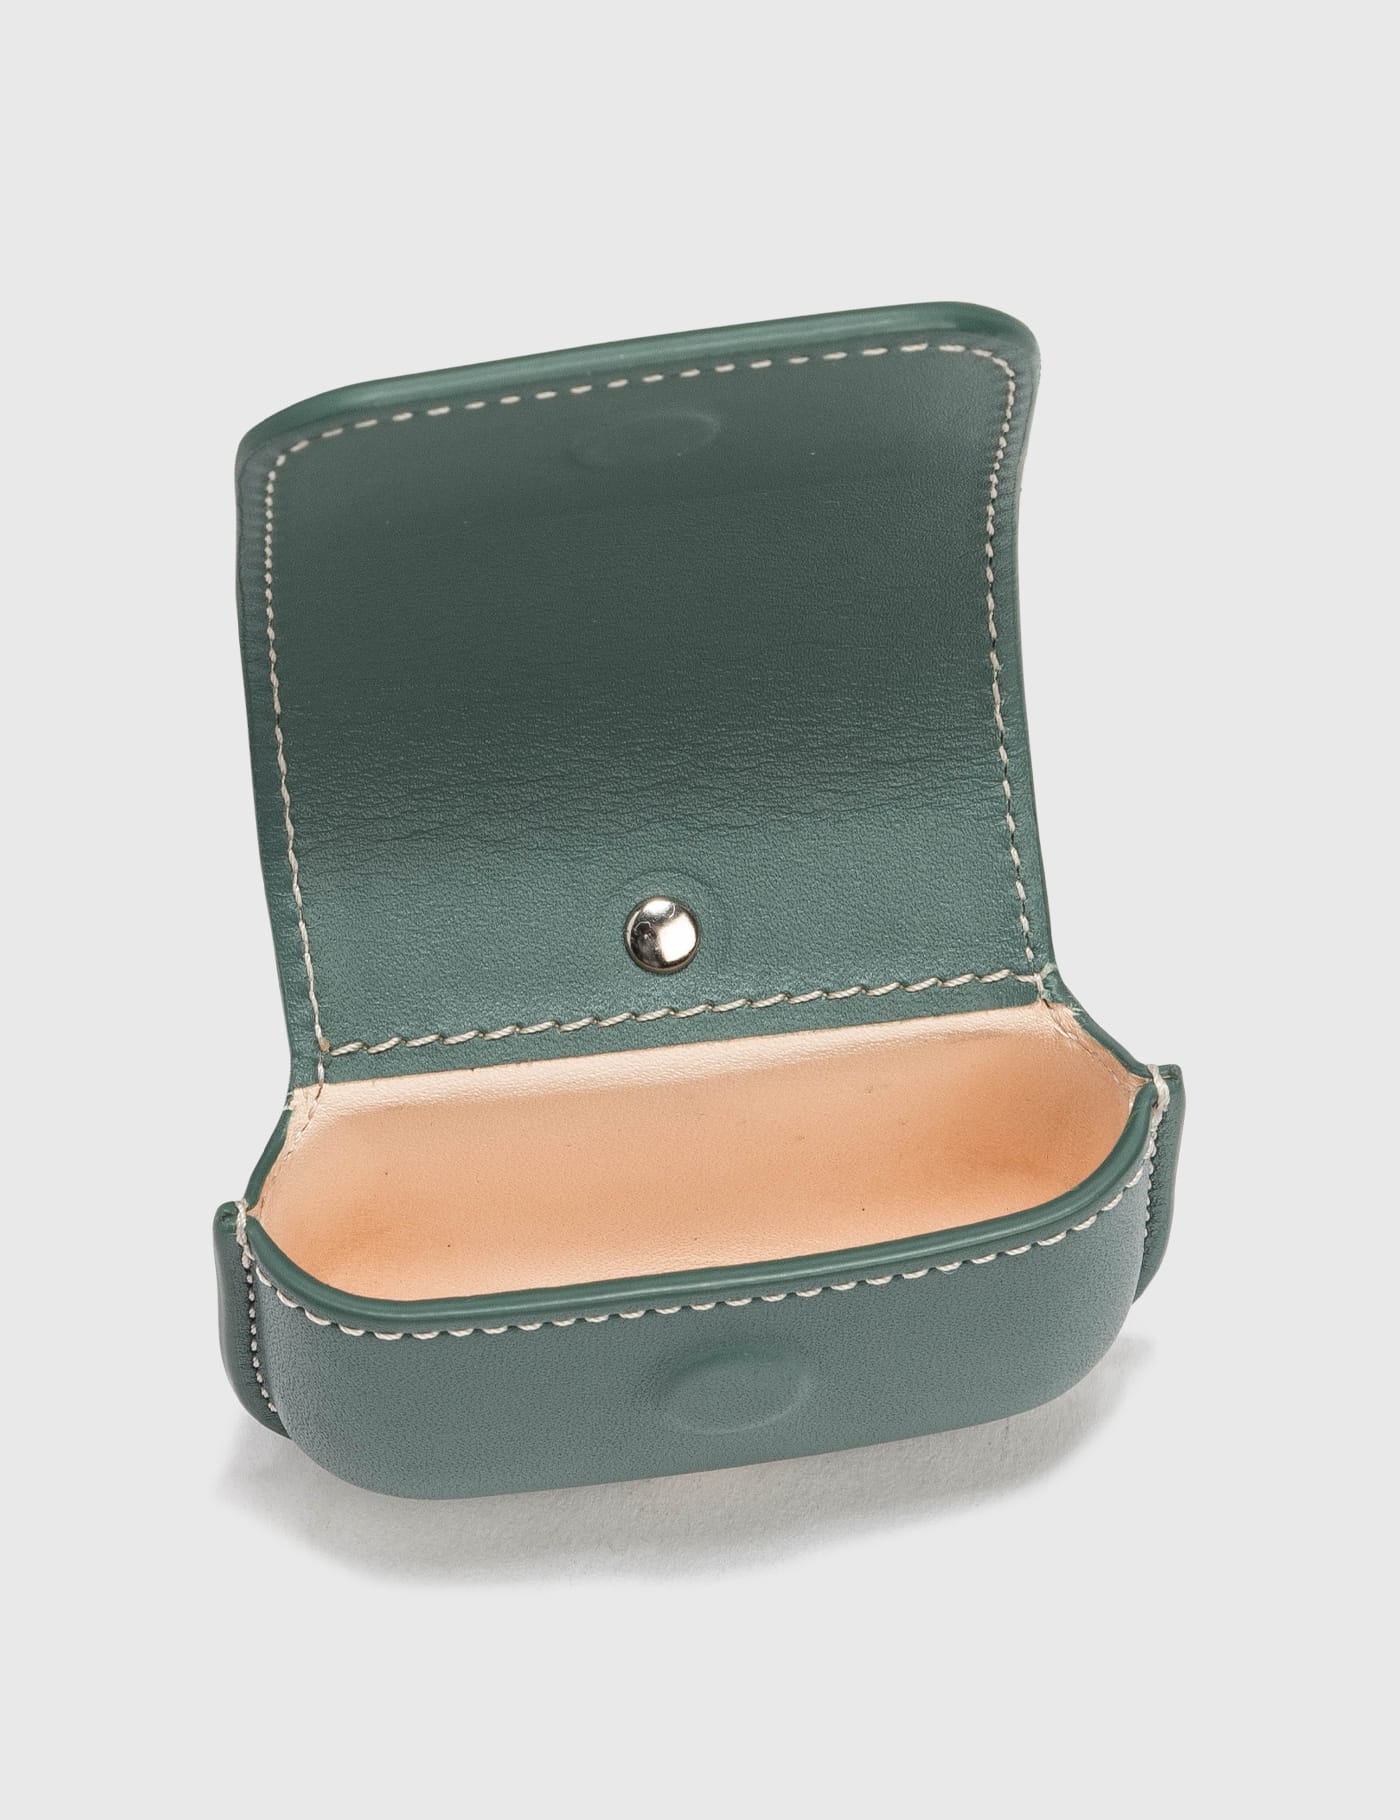 A.P.C. - Max Pro Airpods Case | HBX - Globally Curated Fashion and 